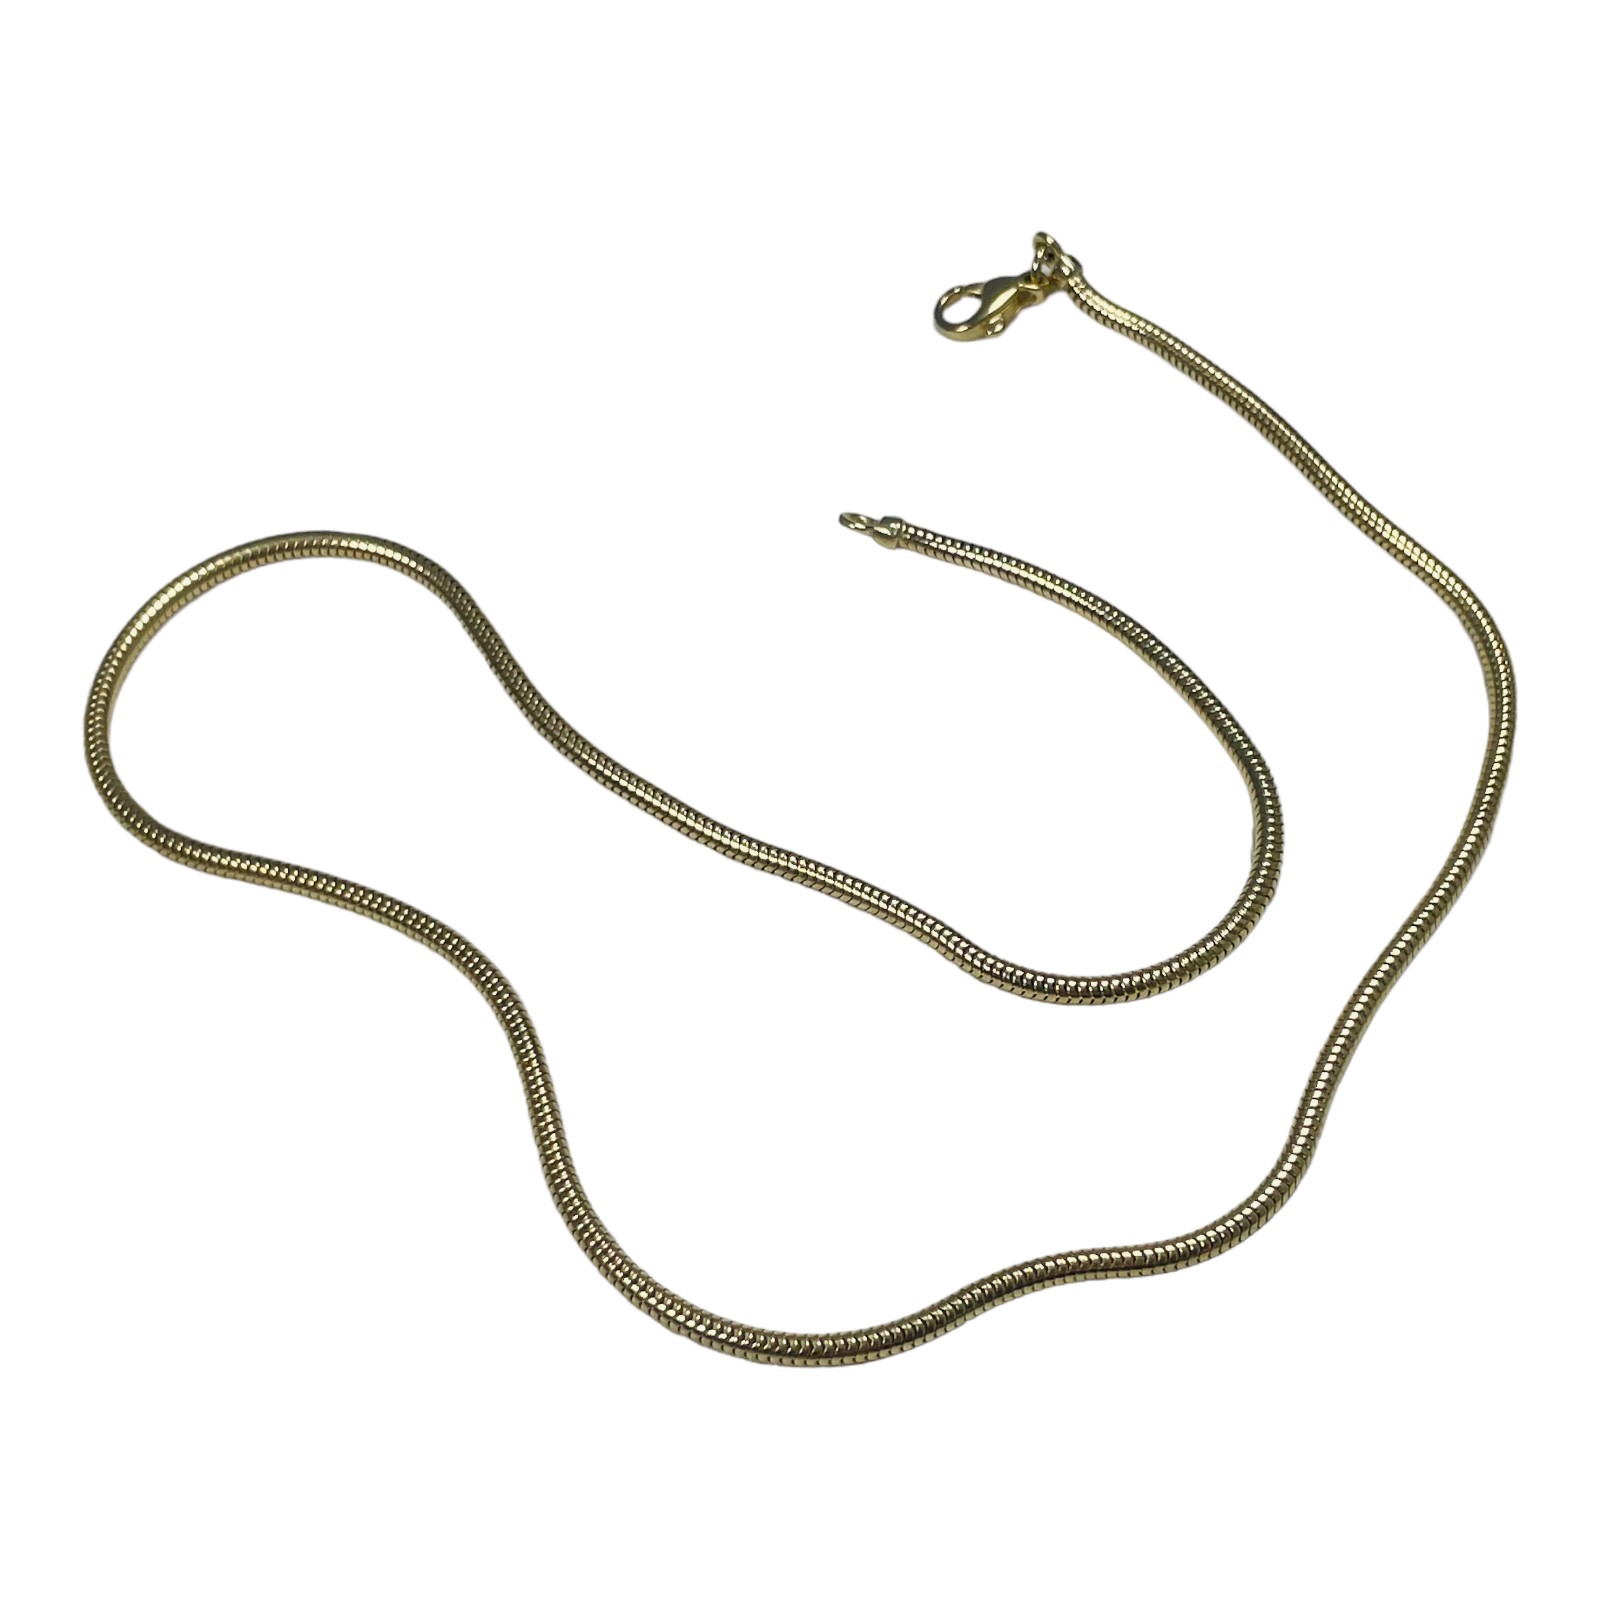 A 9ct yellow gold snake link chain, 18 inches in length, weighs 12.9 grams, Birmingham hallmarks. - Image 5 of 6